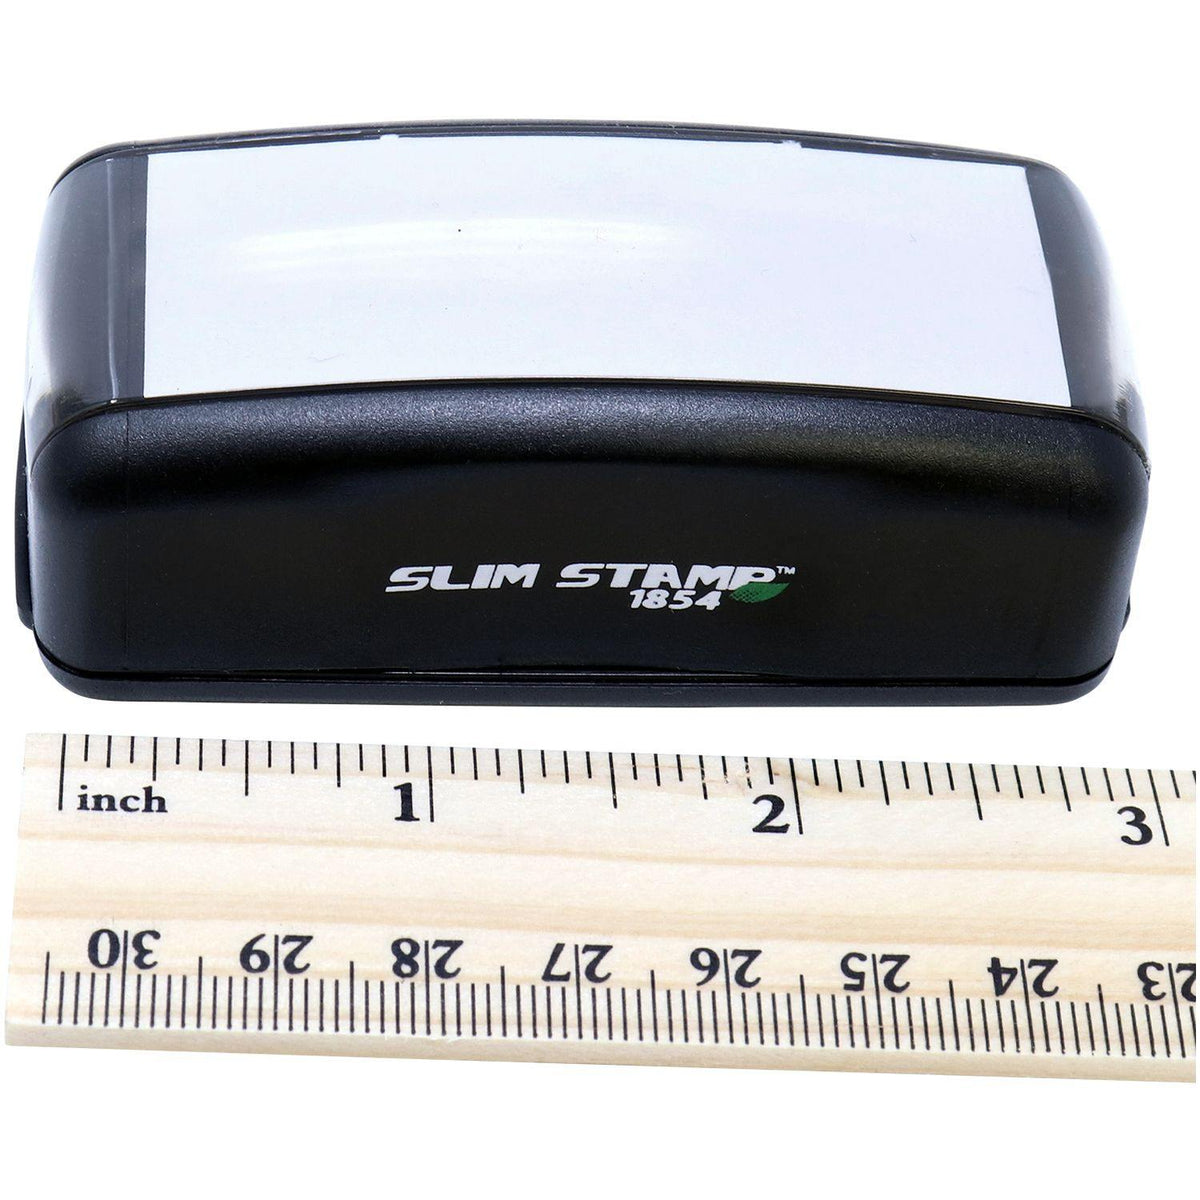 Measurement Large Pre-Inked Copia Stamp with Ruler